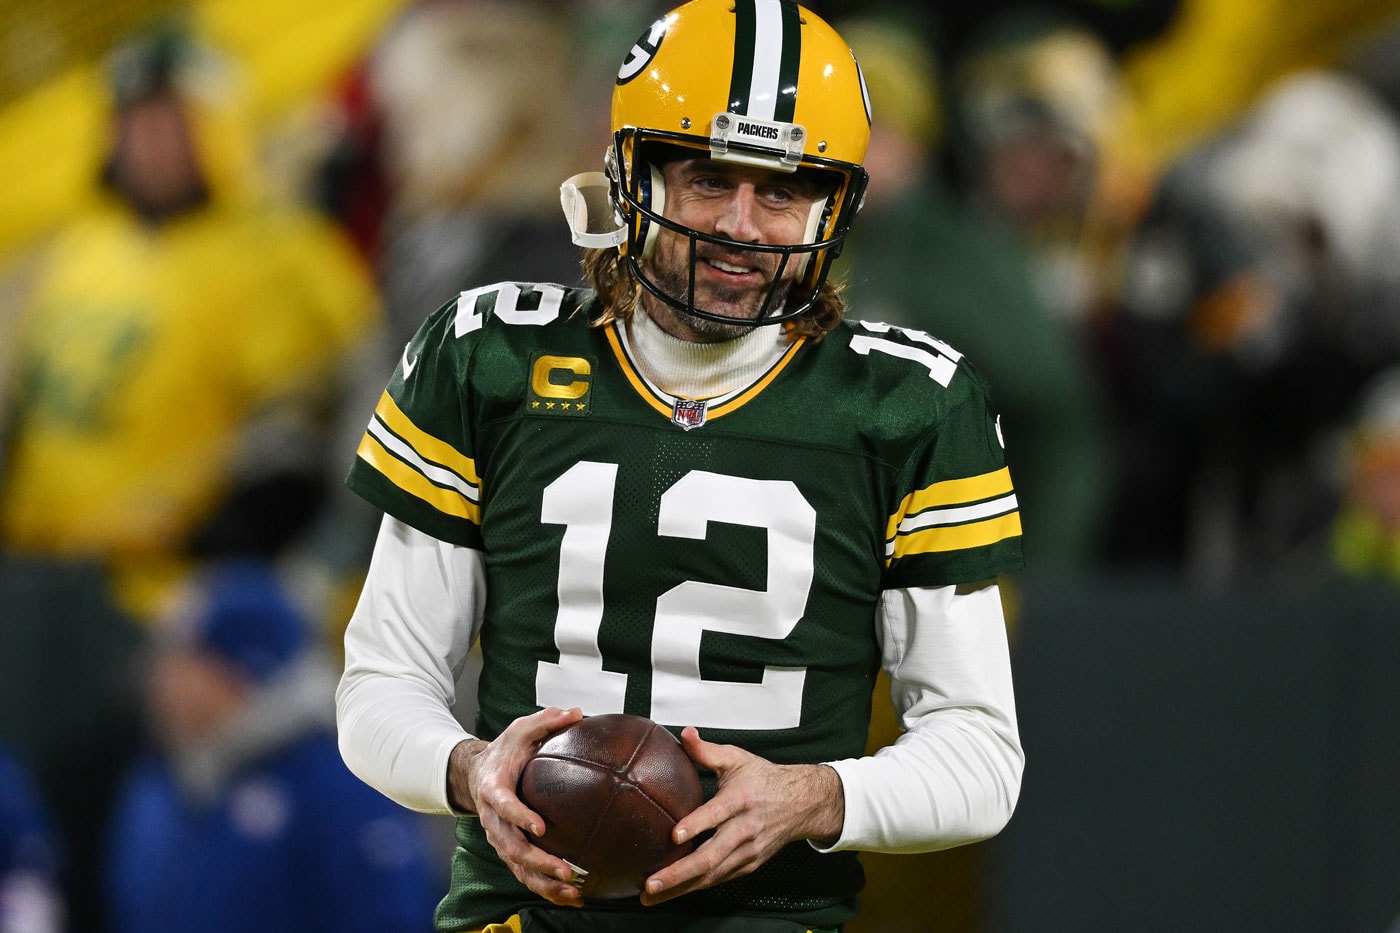 Aaron Rodgers Confirms He Will Be Returning to the Green Bay Packers Next Season quarterback qb year 18 nfl american football